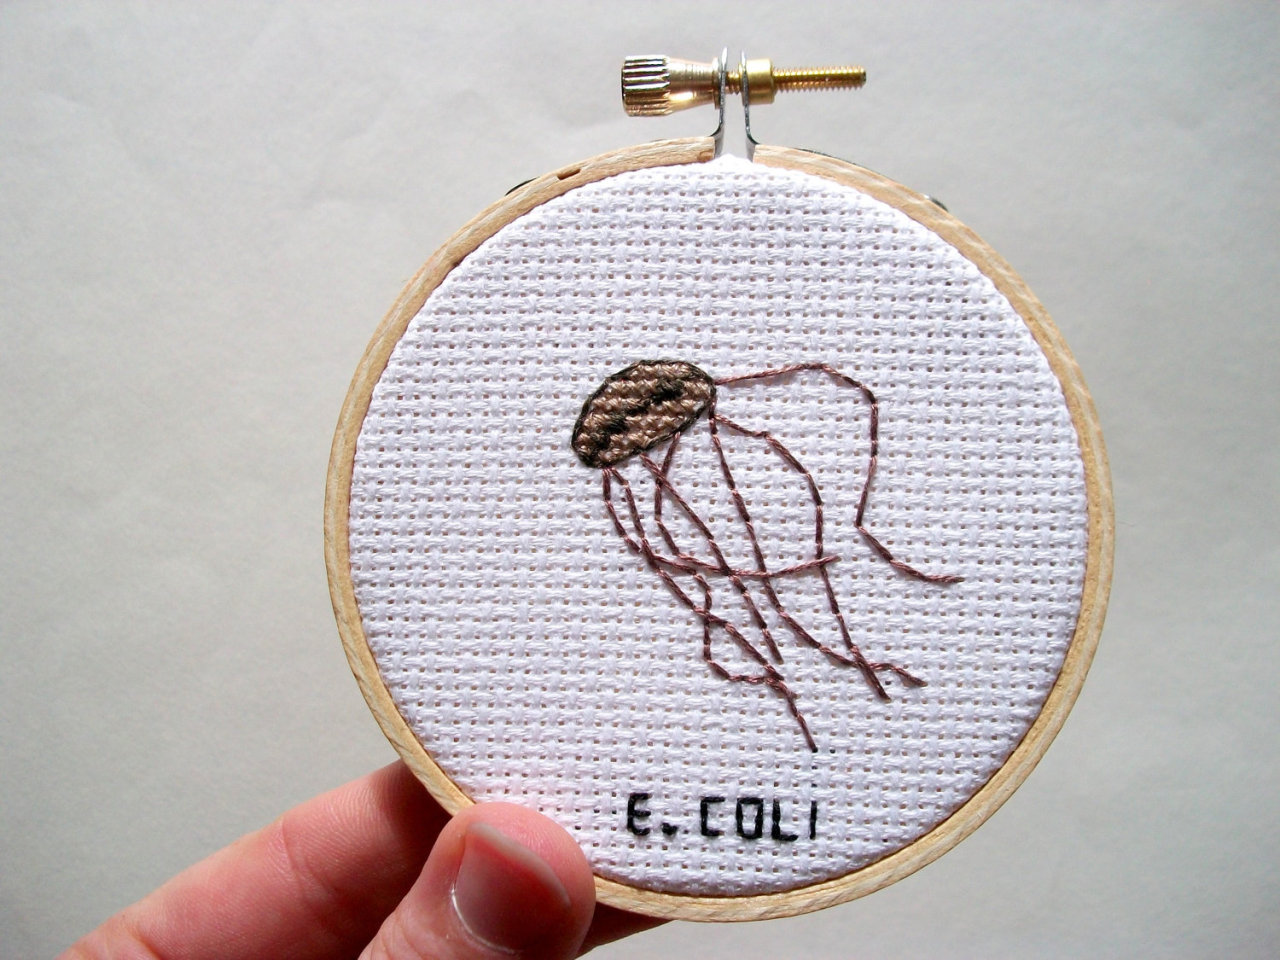 culturenlifestyle: Adorable Cross-Stitched Illustrations of Microbes and Germs by